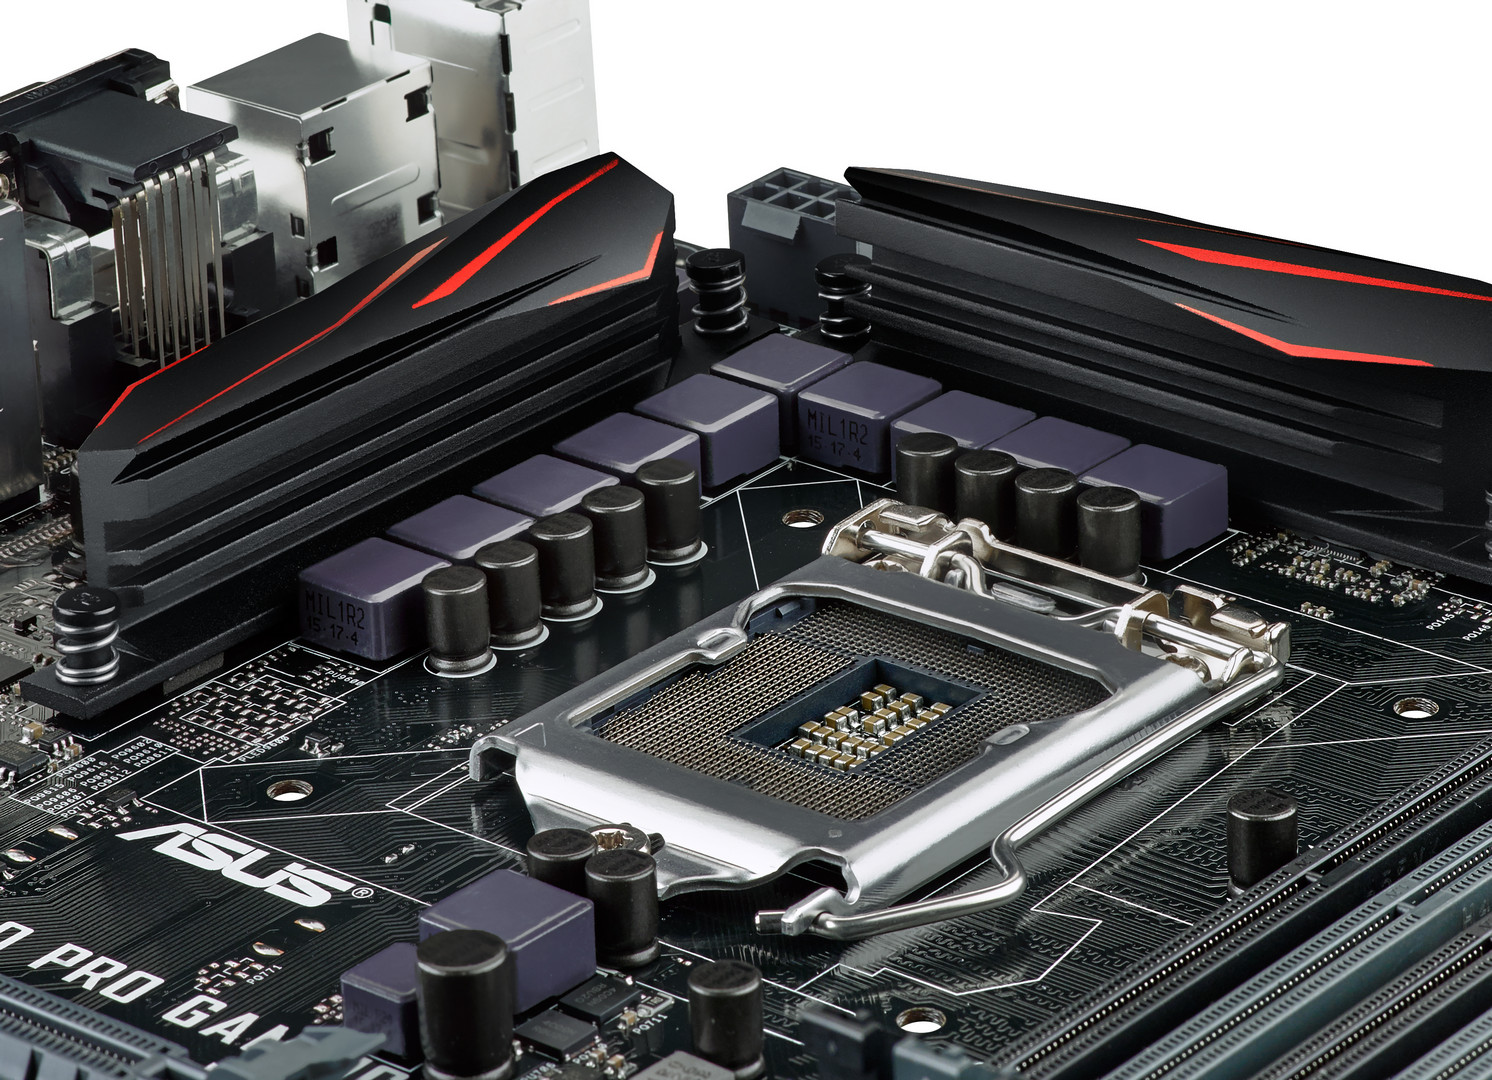 All things ASUS Z170 Skylake Platform - Overviews, Build Guides